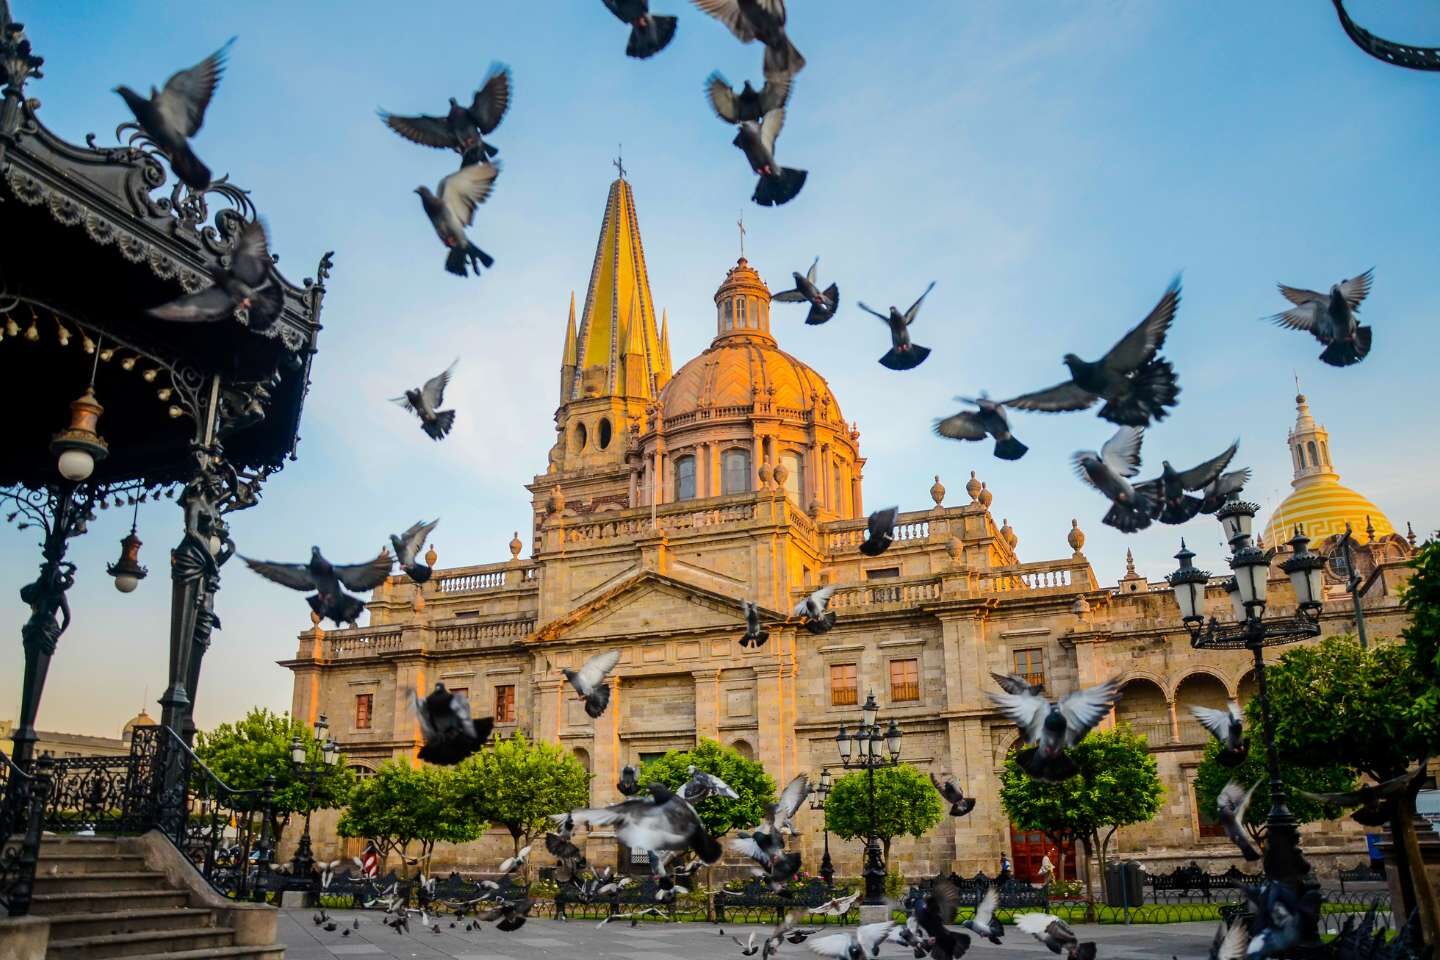 Beautiful church in Mexico with doves